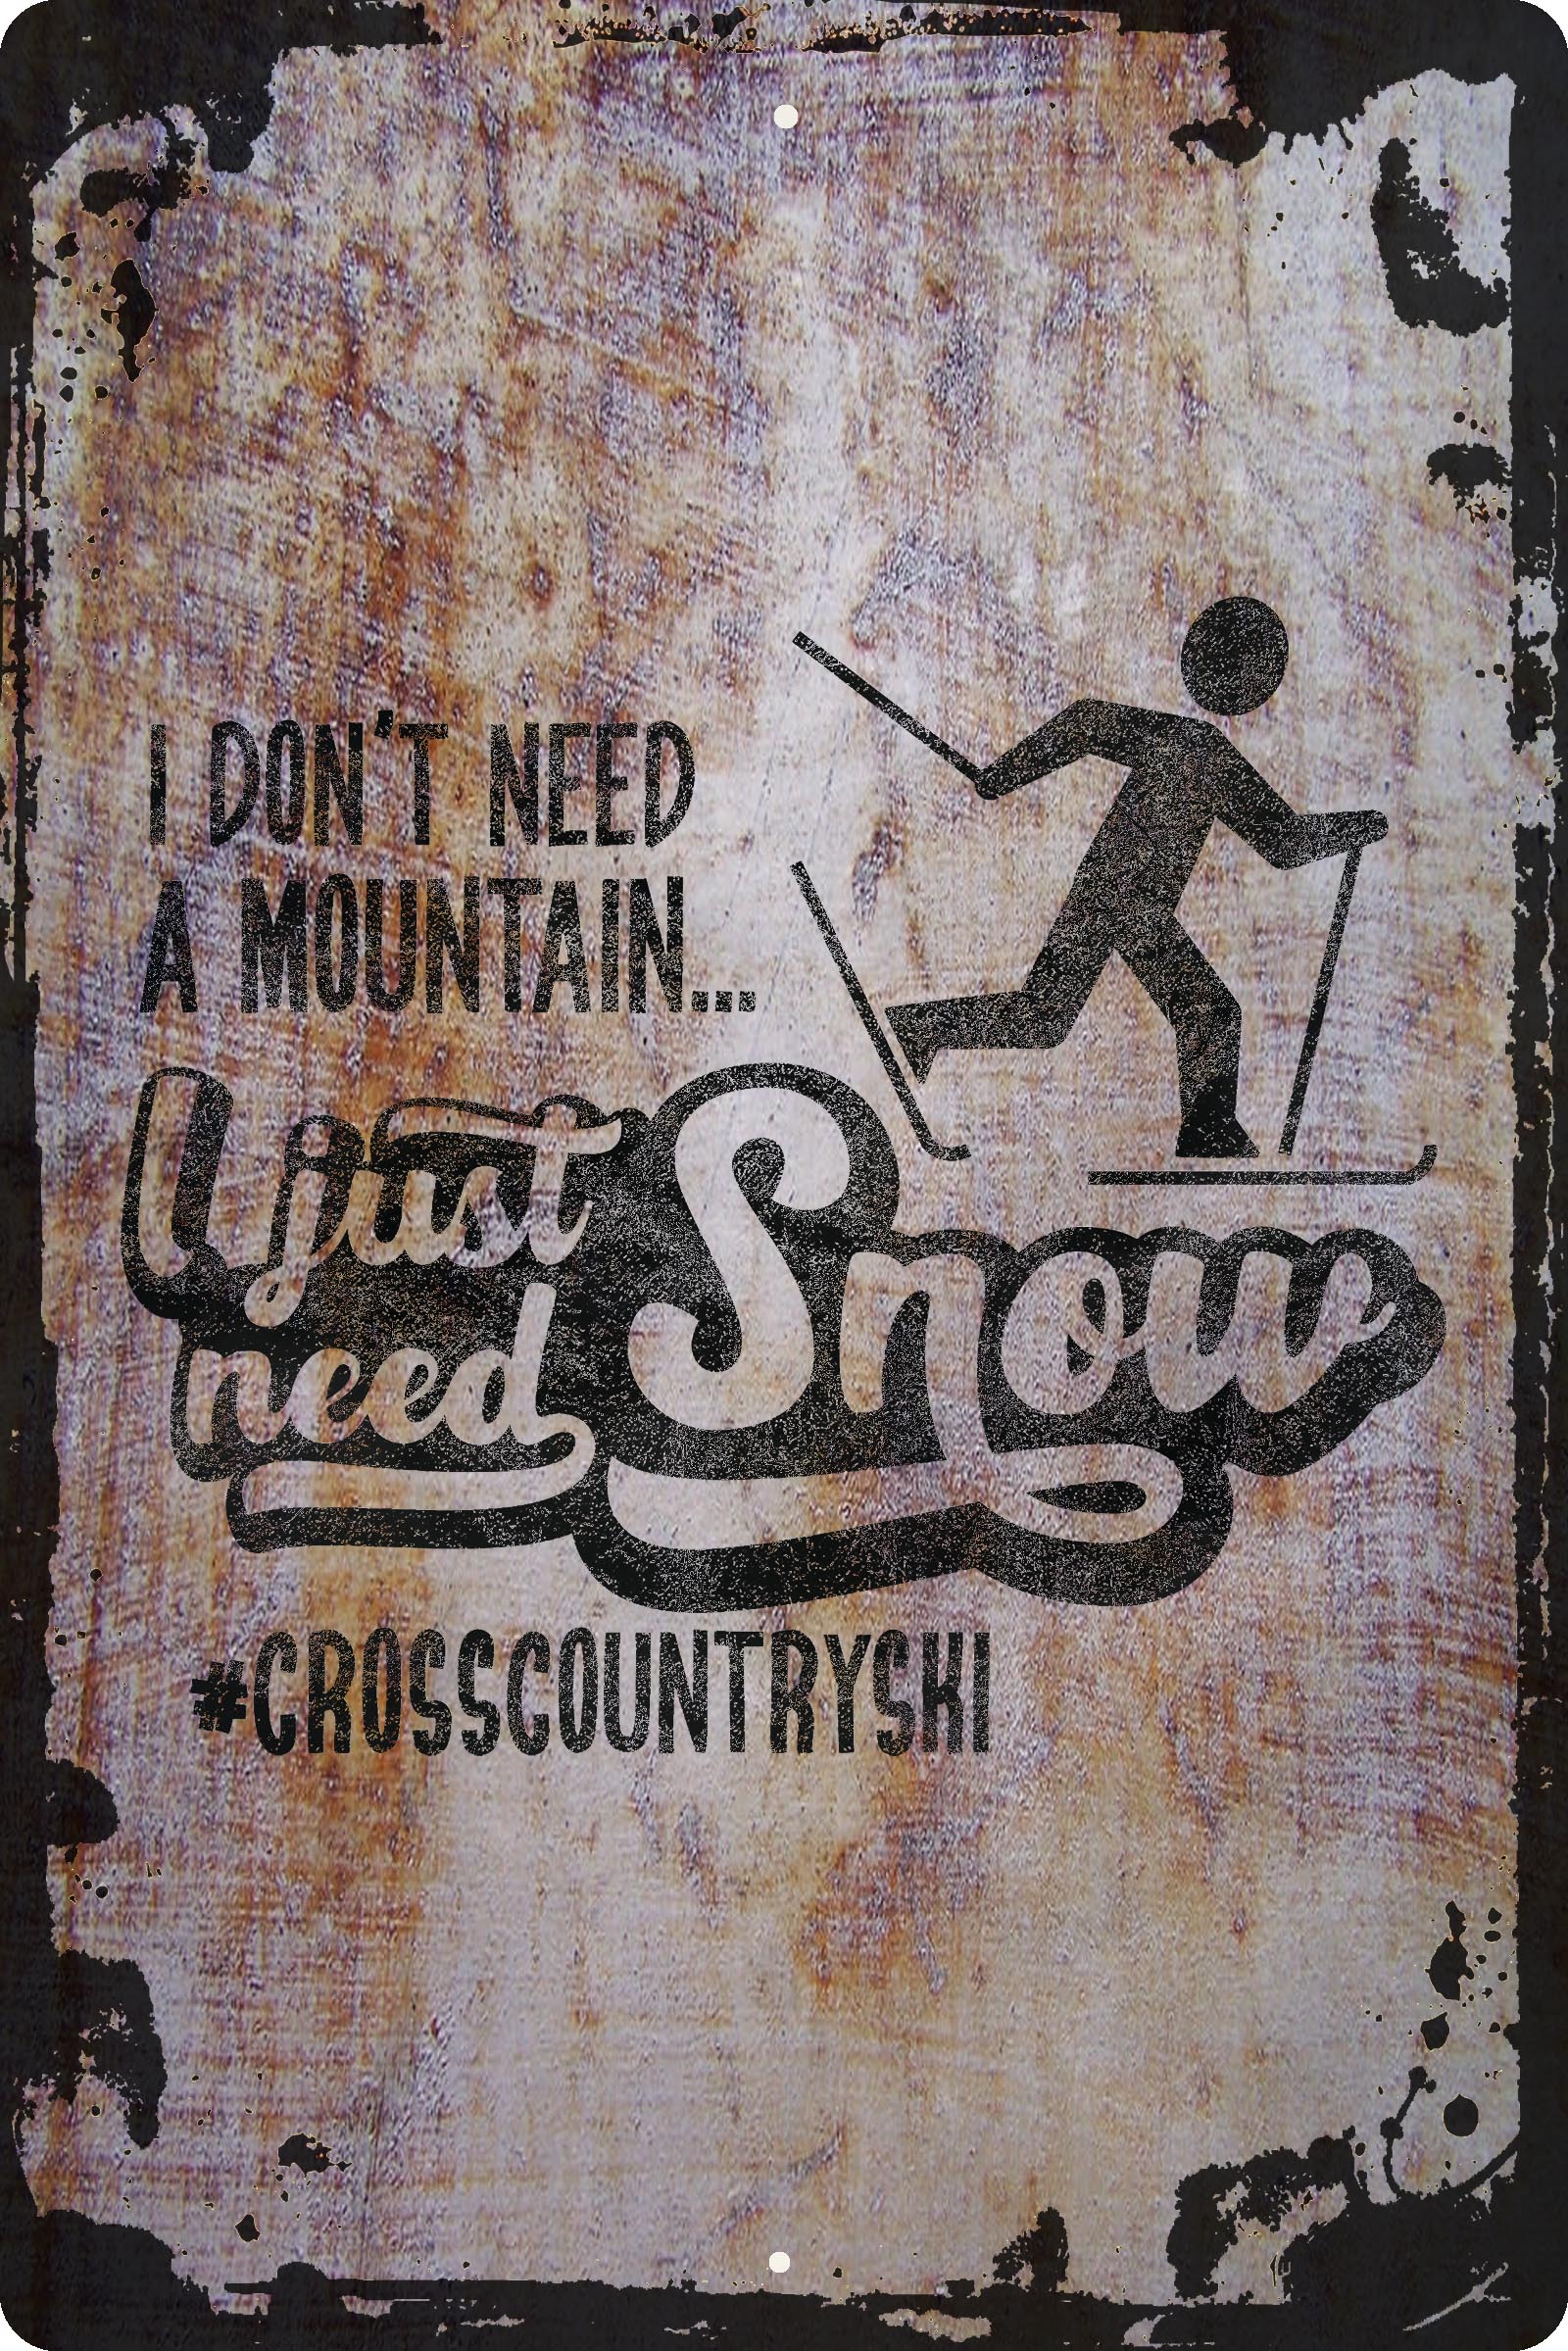 Wall Sign I don’t need a mountain I just need snow ski skiing cross country Decorative Art Wall Decor Funny Gift - image 1 of 1